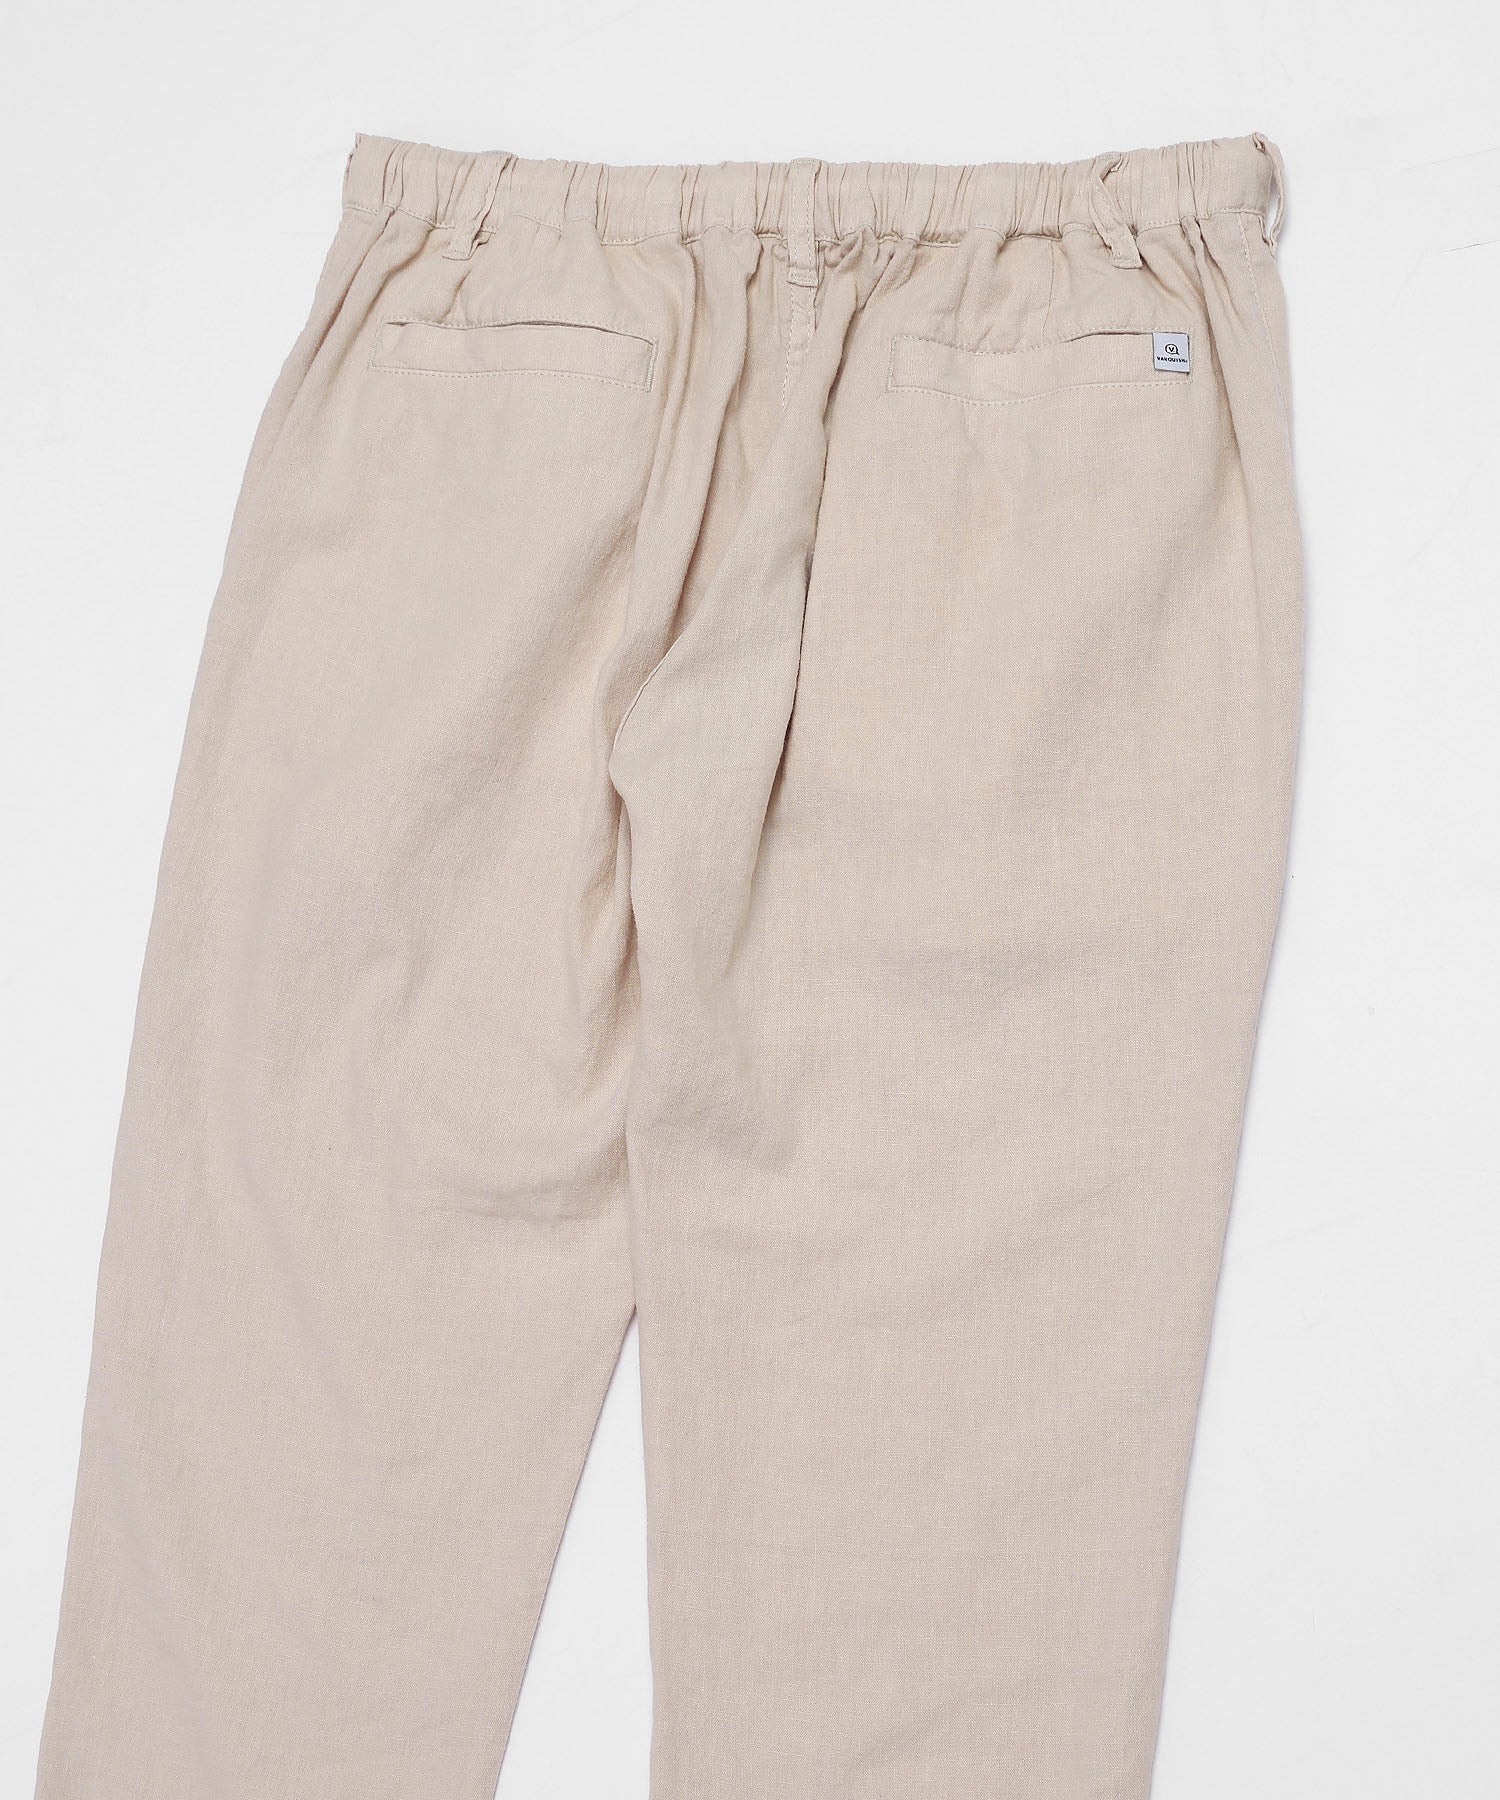 STRETCH LIGHT WEIGHT EASY PANTS XL BEIGE